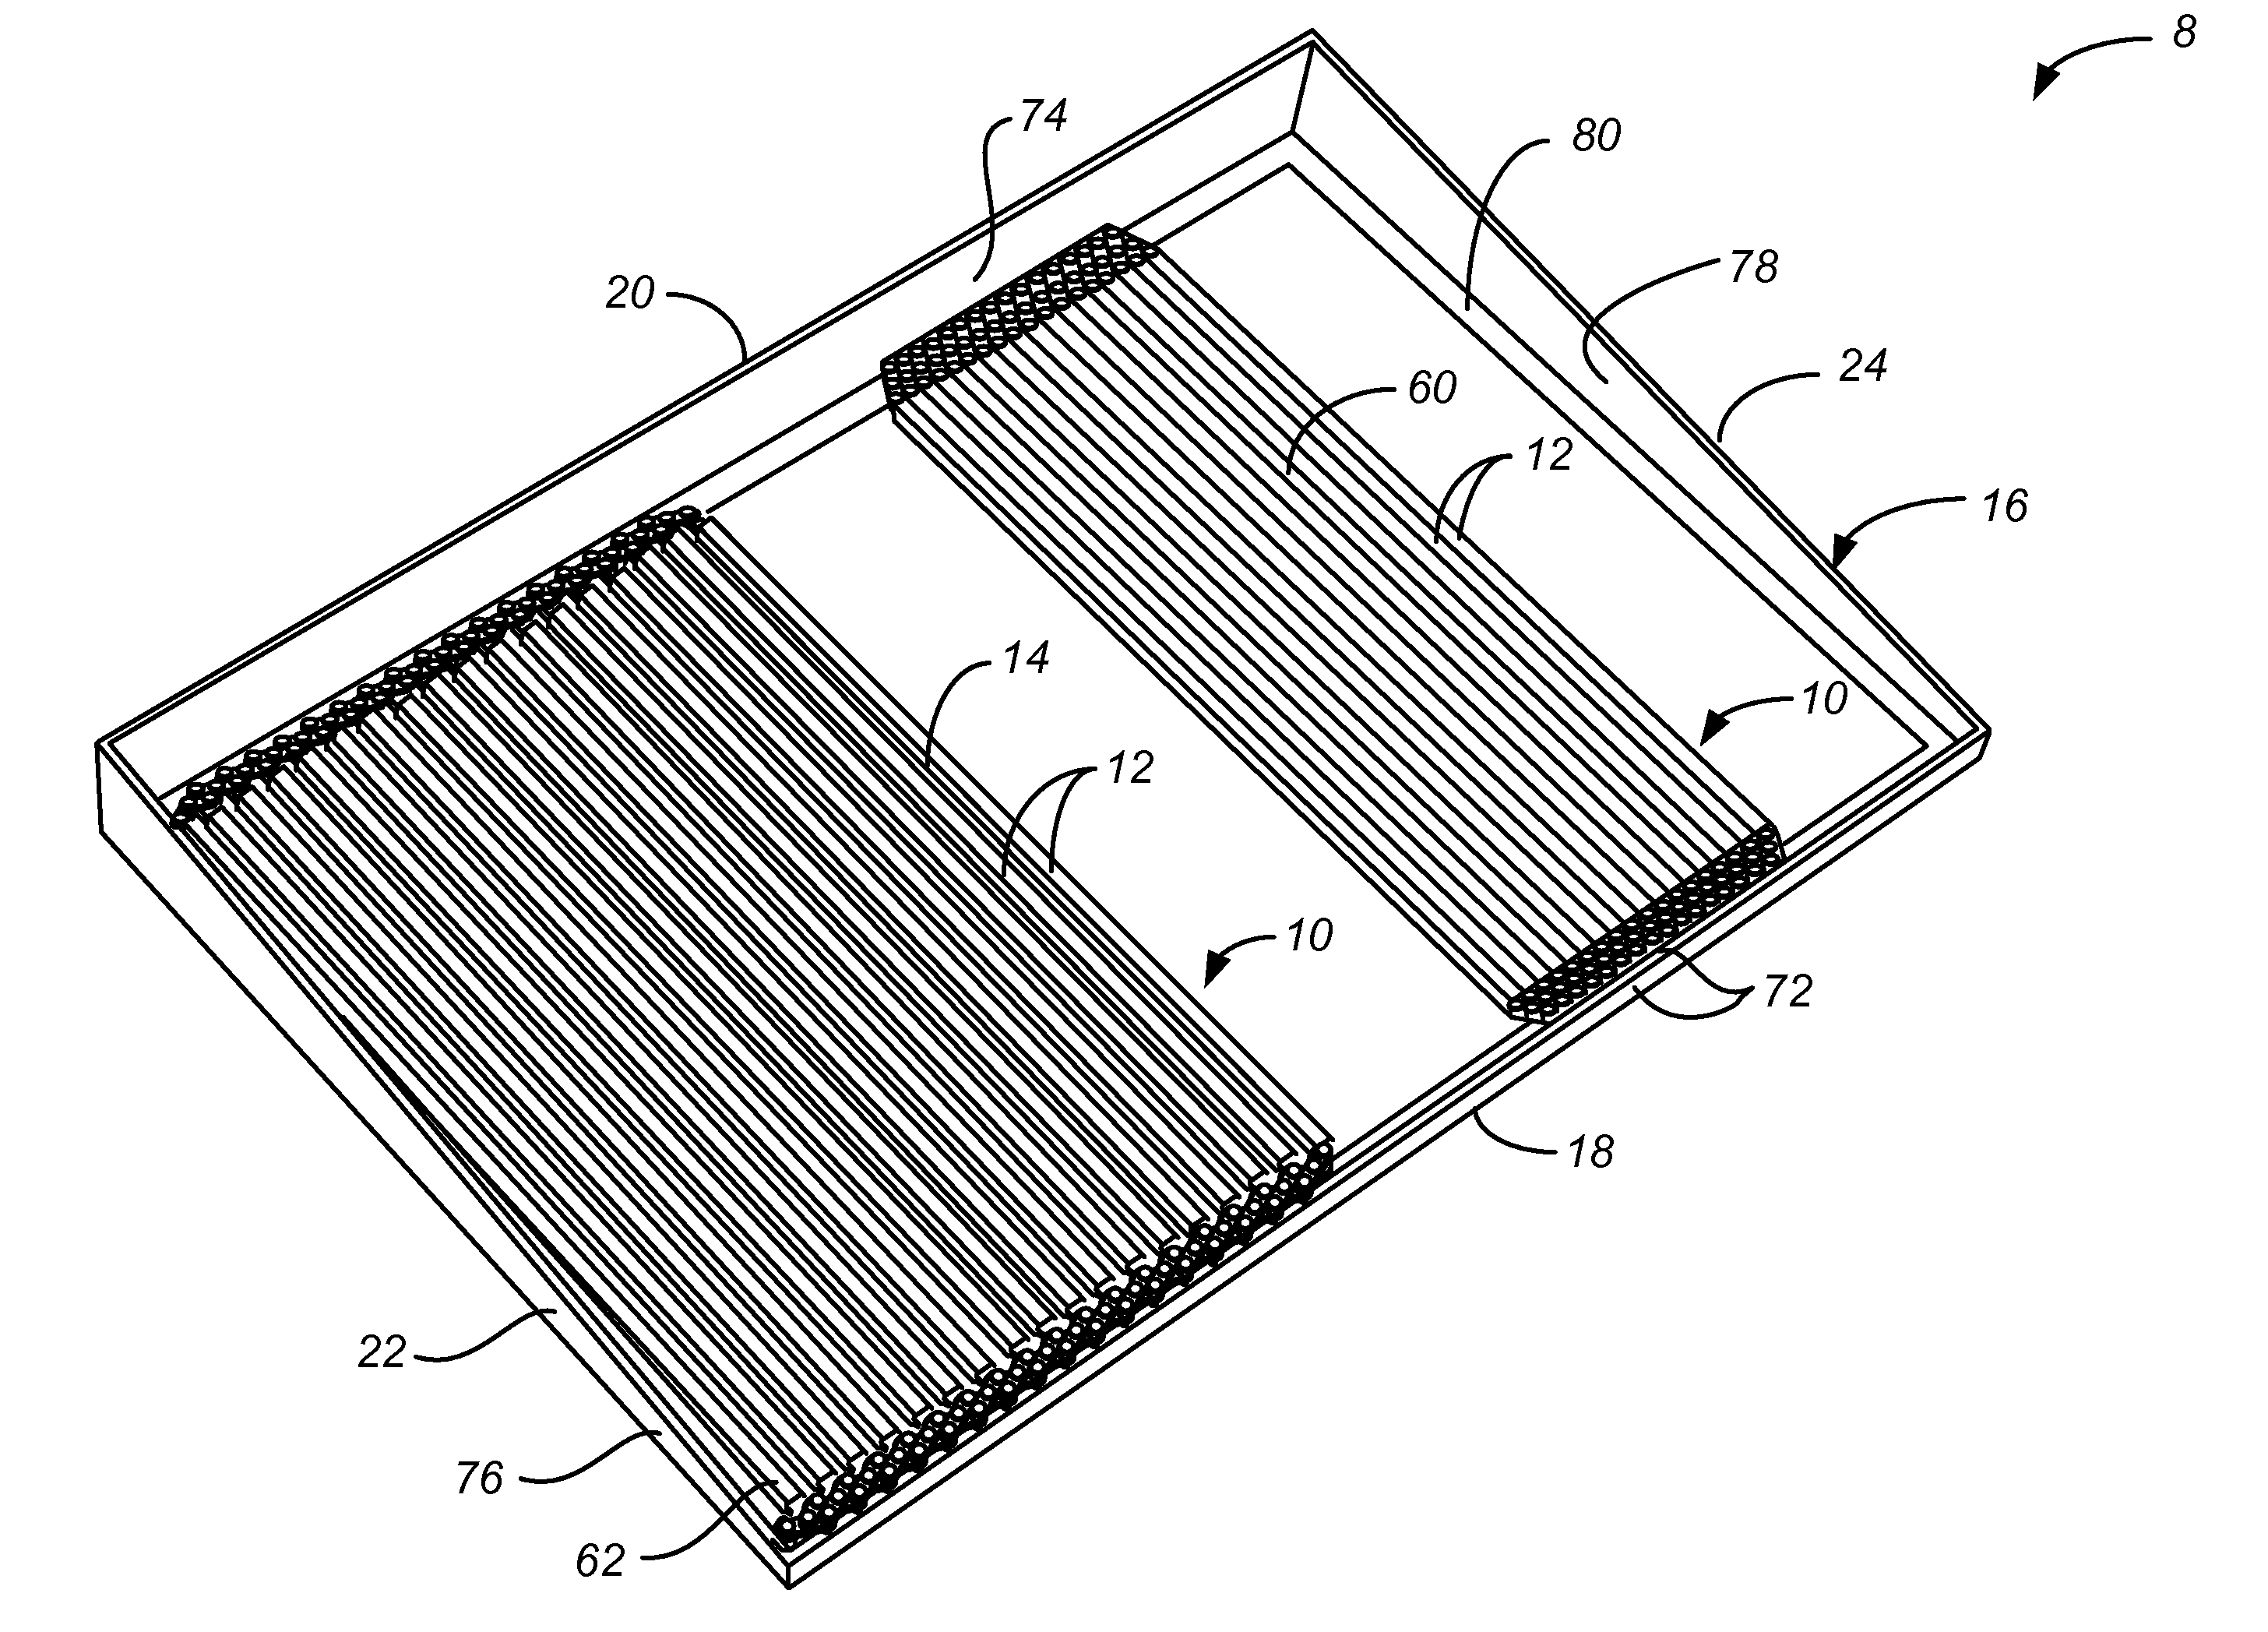 Adjustable pitch cooking grate